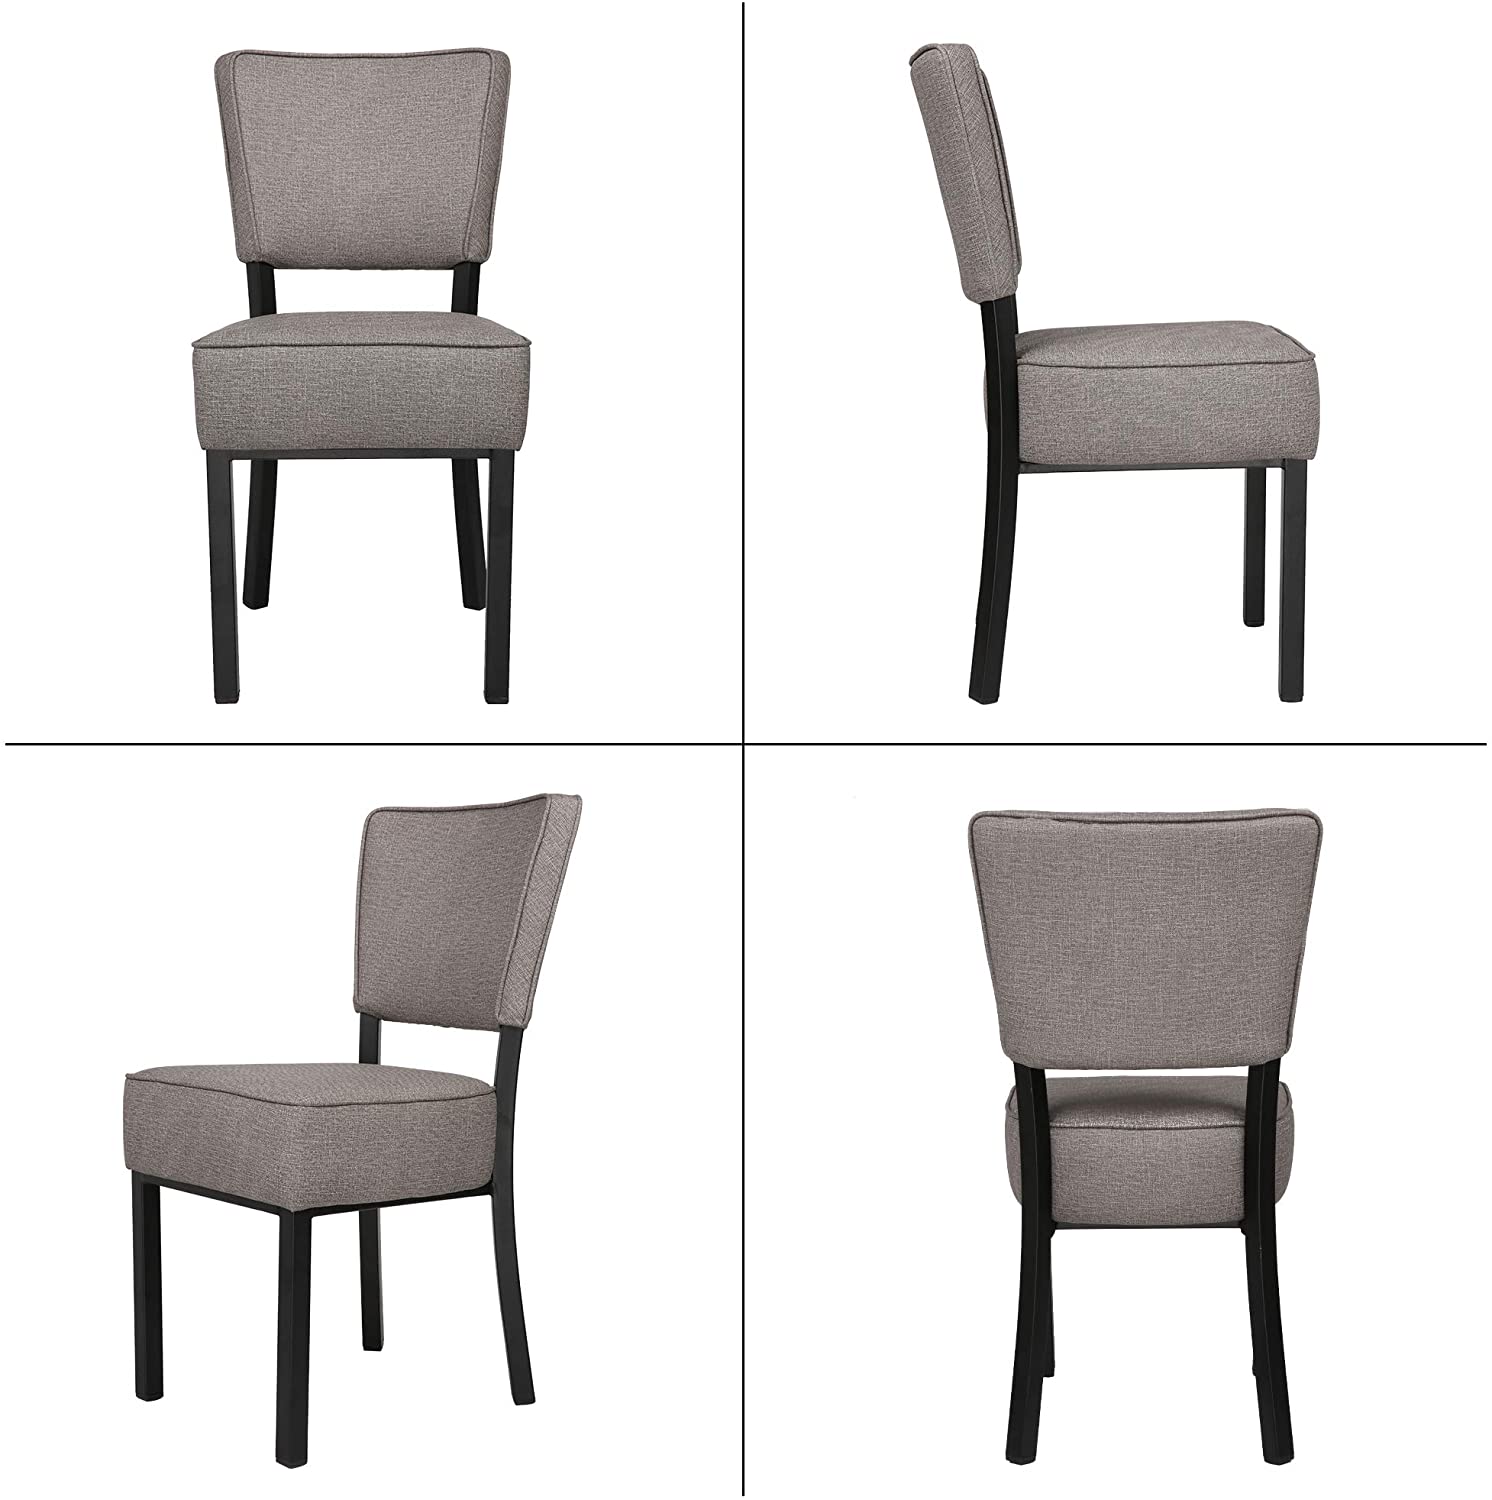 LUCKYERMORE Set of 2 Kitchen Dining Chairs PU Leather Side Chairs with Soft Cushion, Gray